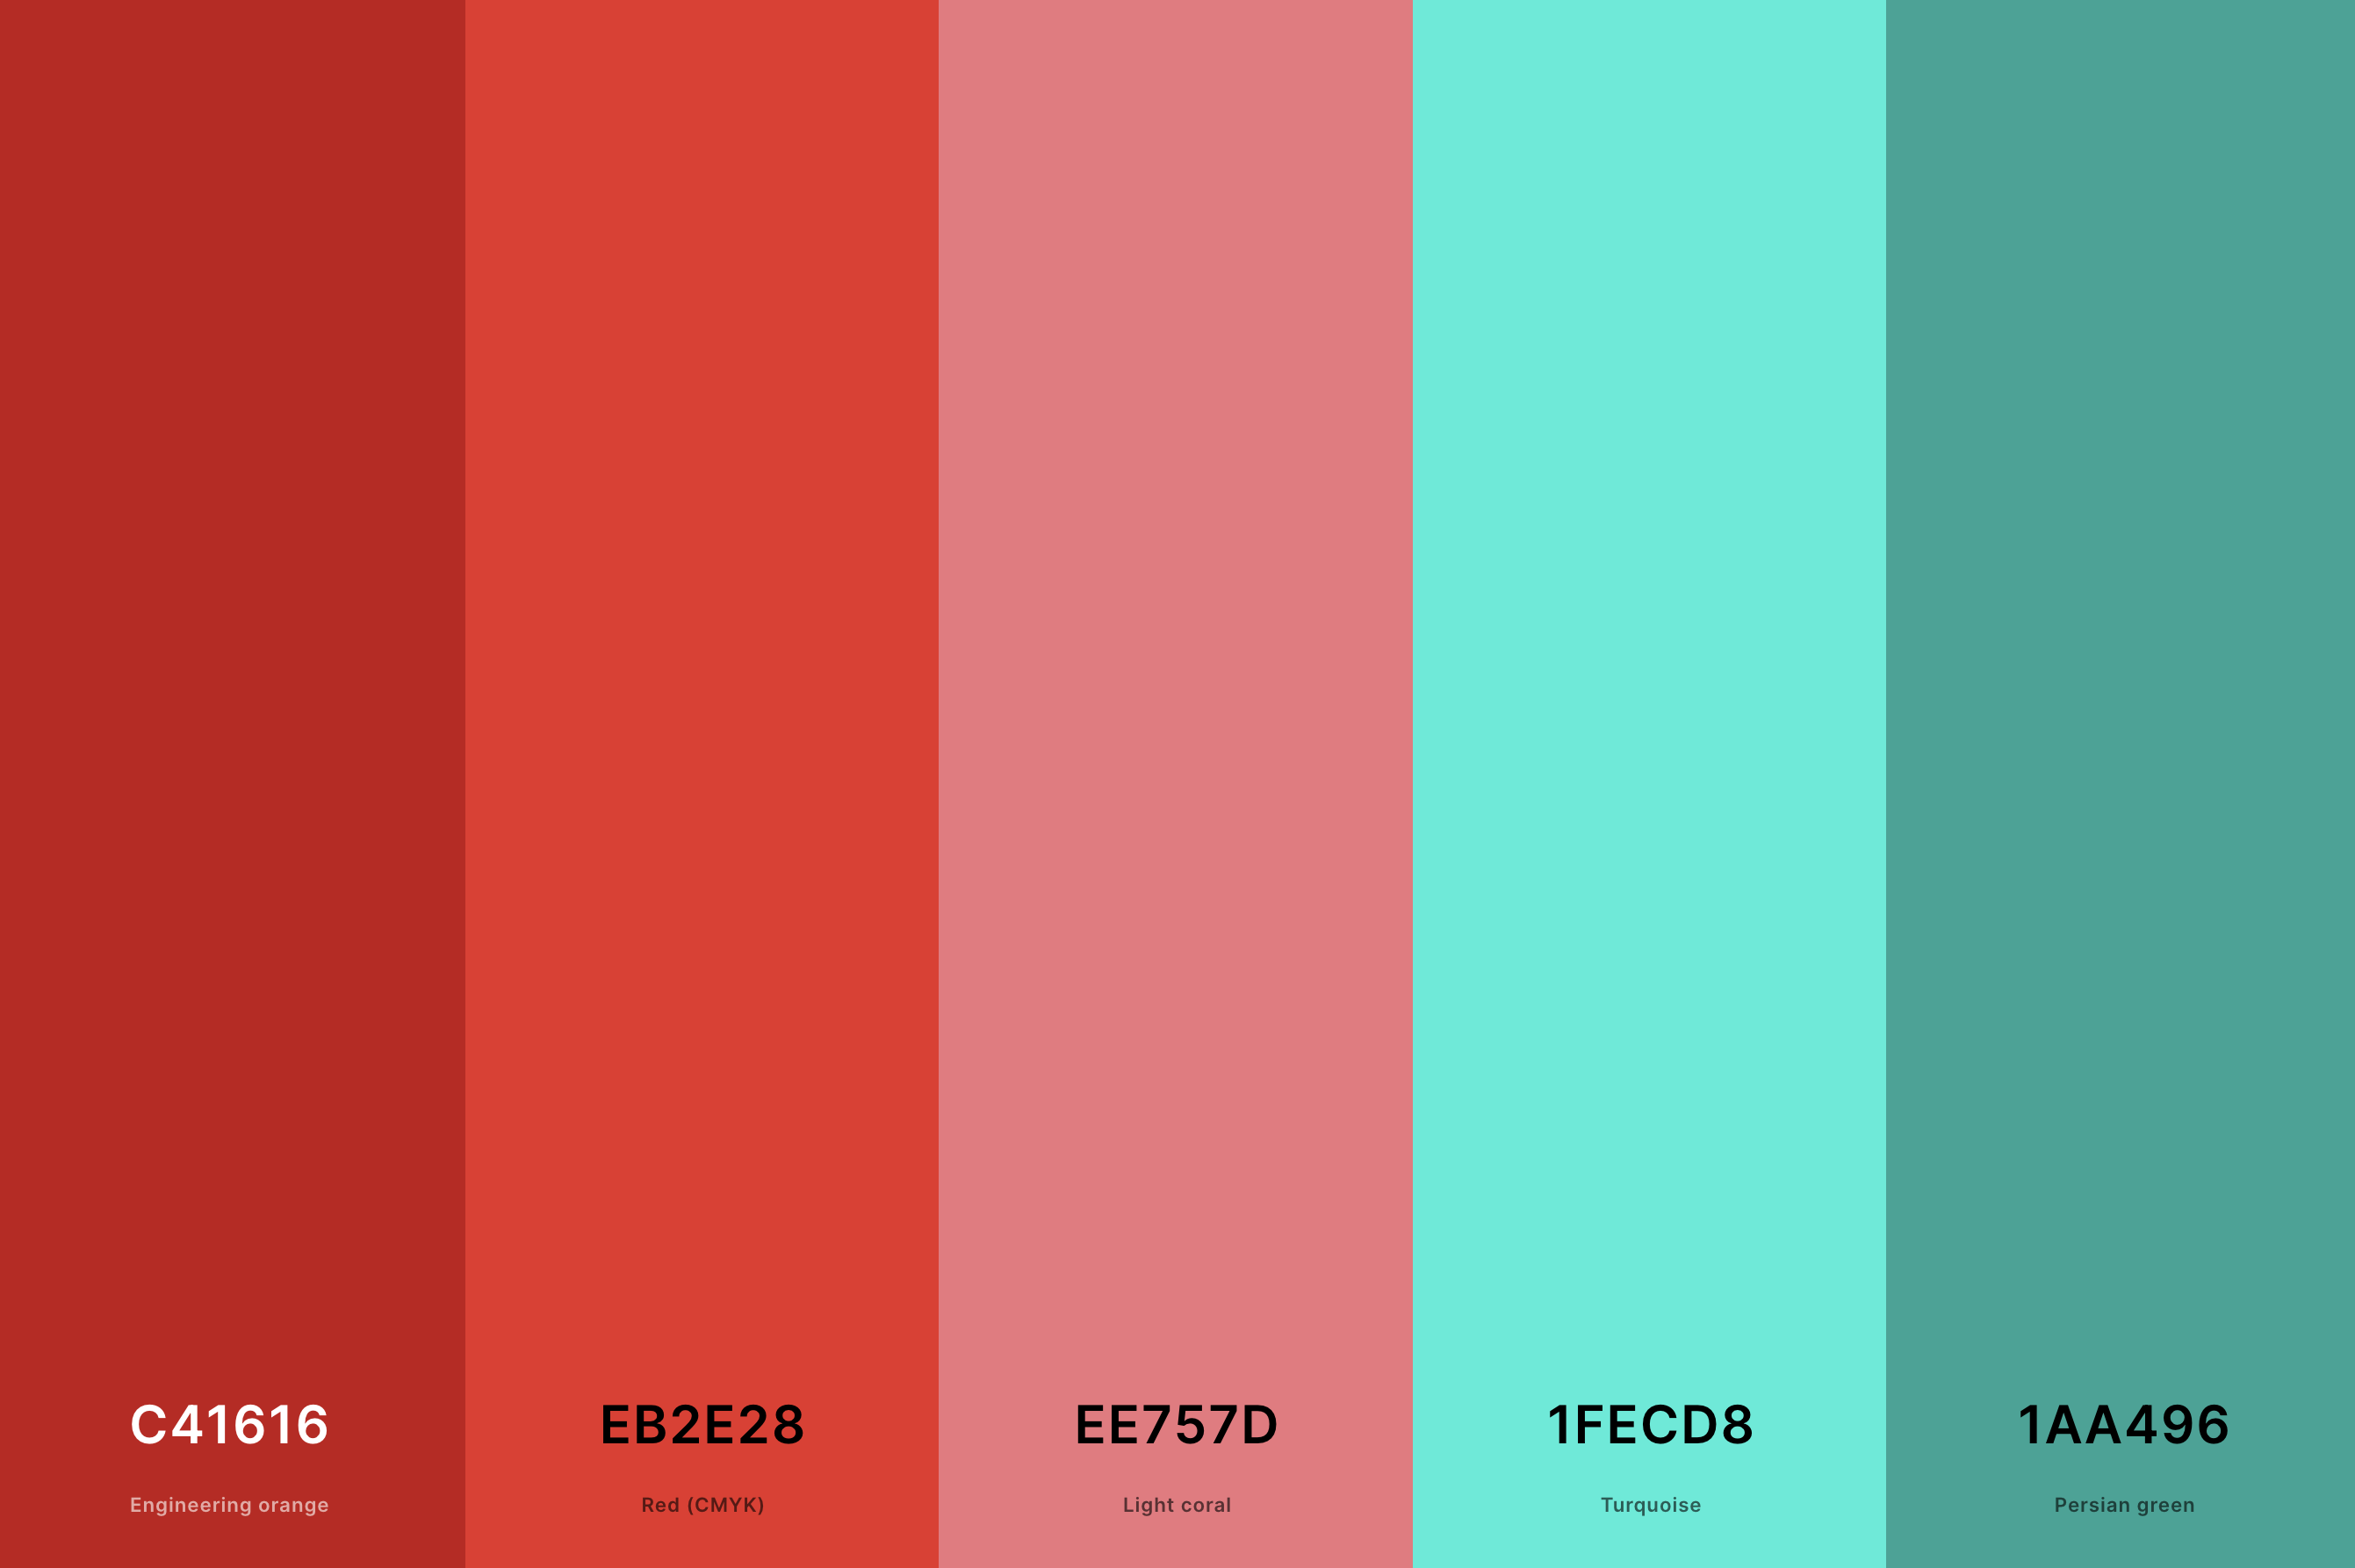 19. Red And Turquoise Color Palette Color Palette with Engineering Orange (Hex #C41616) + Red (Cmyk) (Hex #EB2E28) + Light Coral (Hex #EE757D) + Turquoise (Hex #1FECD8) + Persian Green (Hex #1AA496) Color Palette with Hex Codes